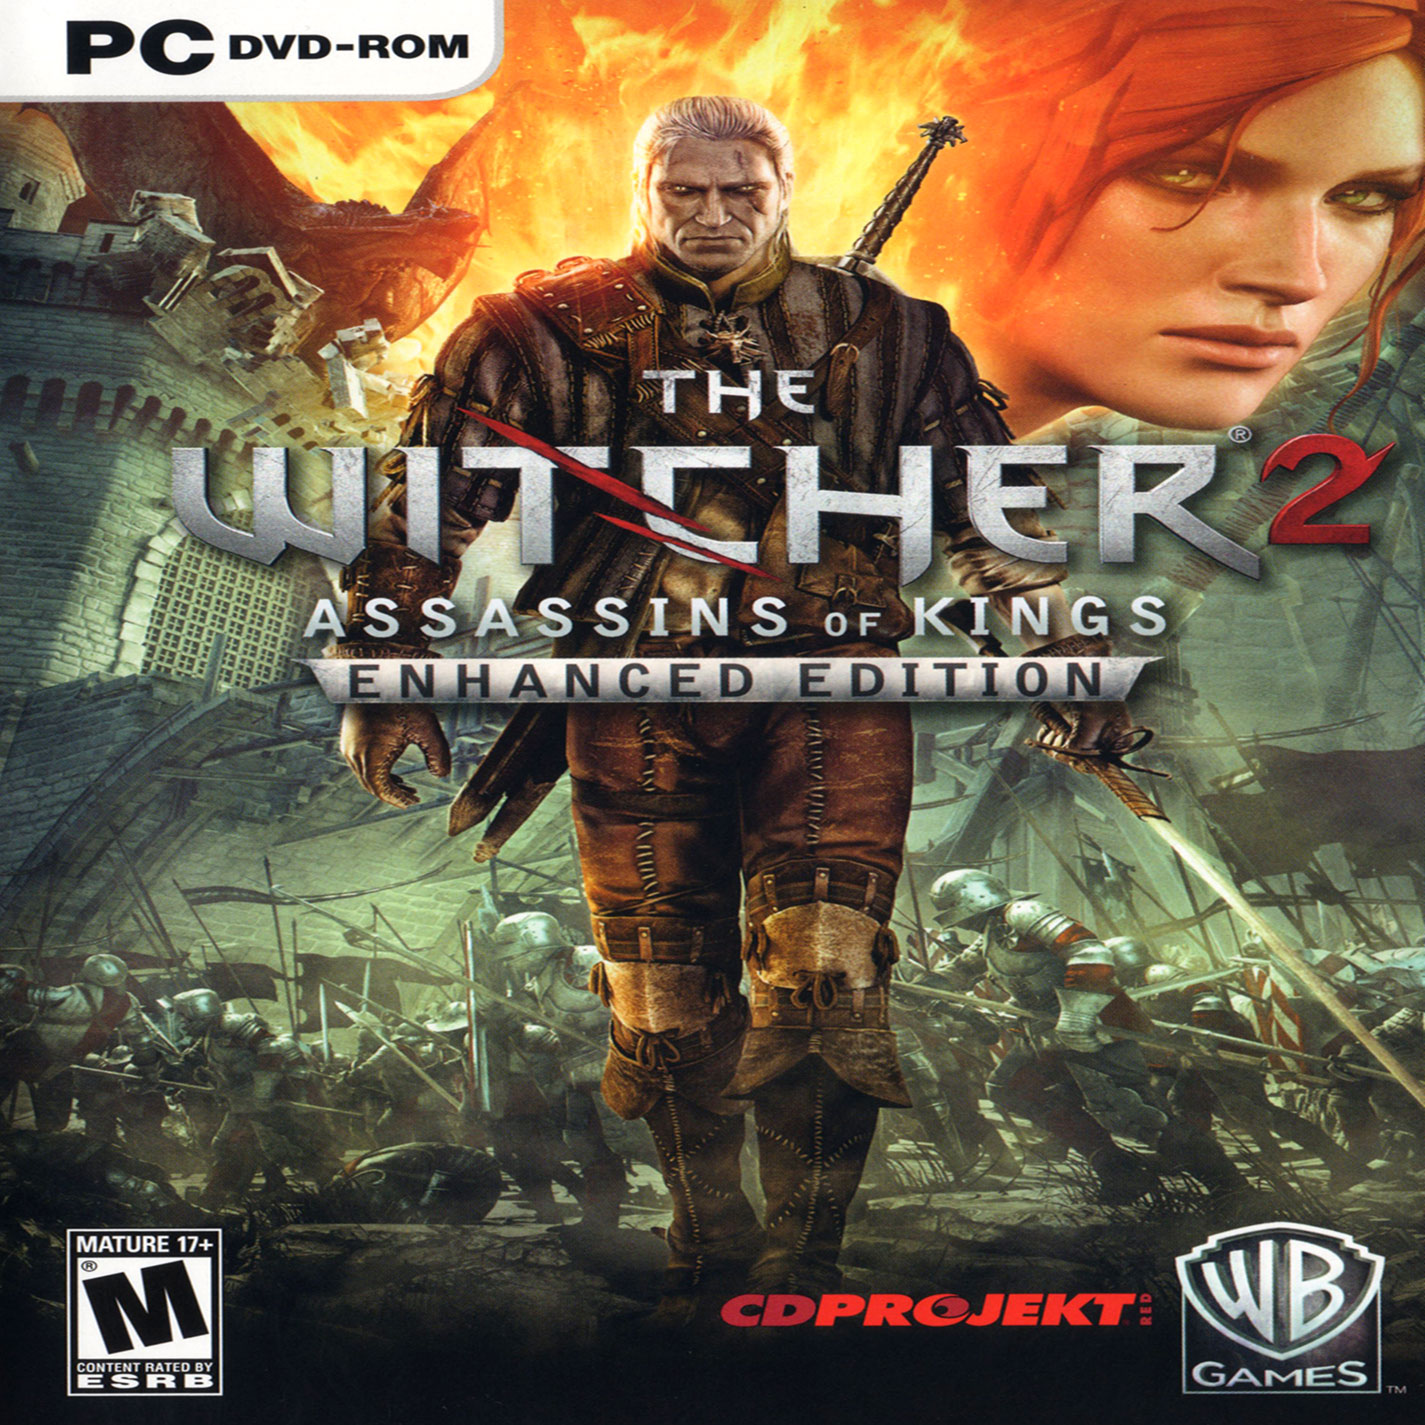 The Witcher 2: Assassins of Kings Enhanced Edition - predn CD obal 2